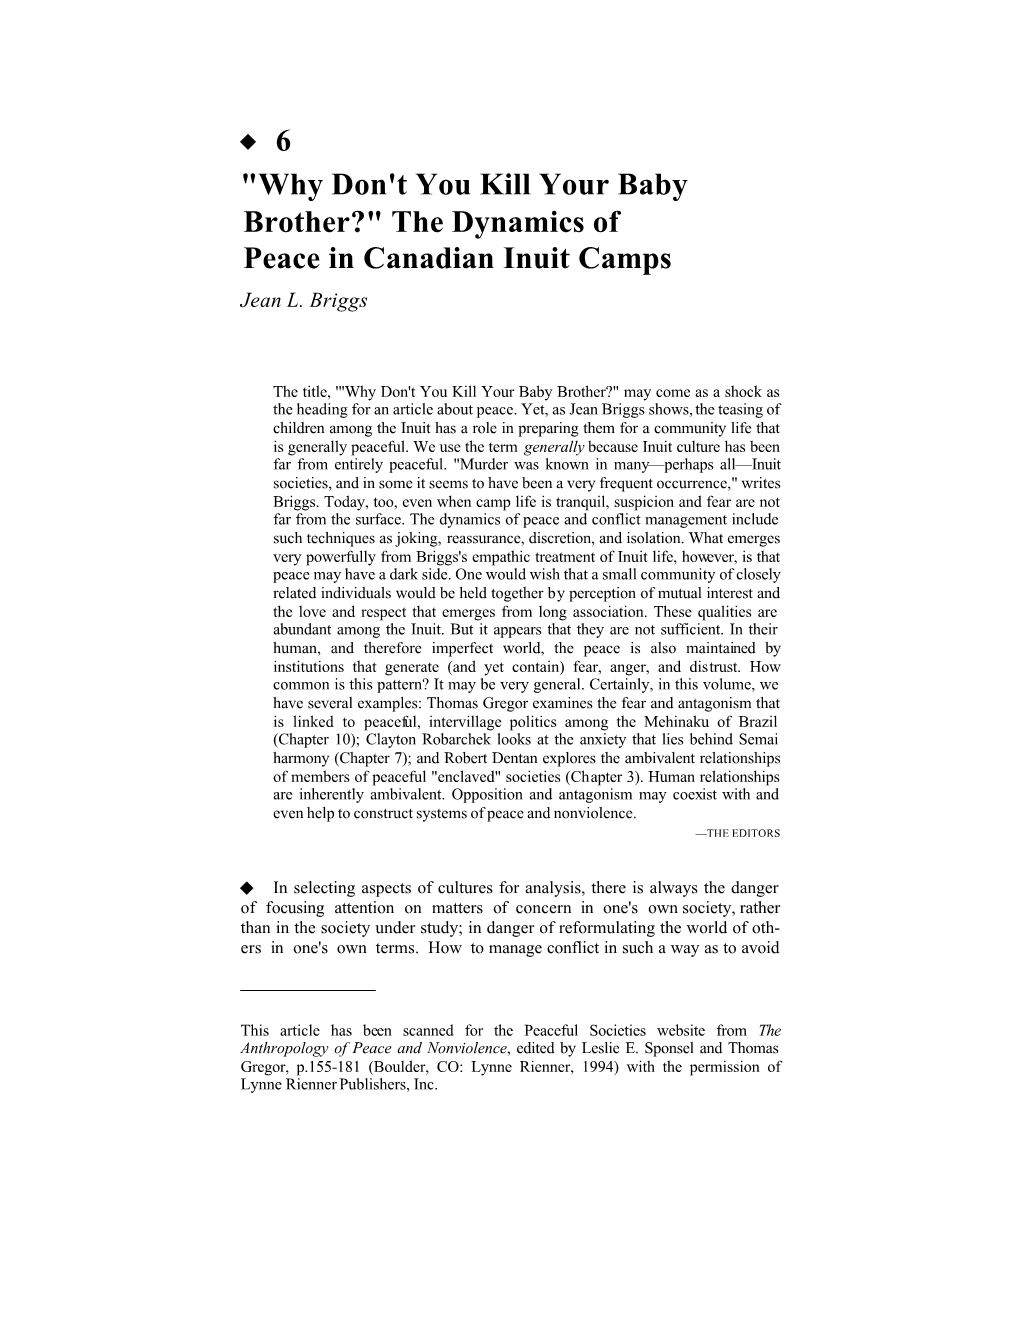 Why Don't You Kill Your Baby Brother?" the Dynamics of Peace in Canadian Inuit Camps Jean L